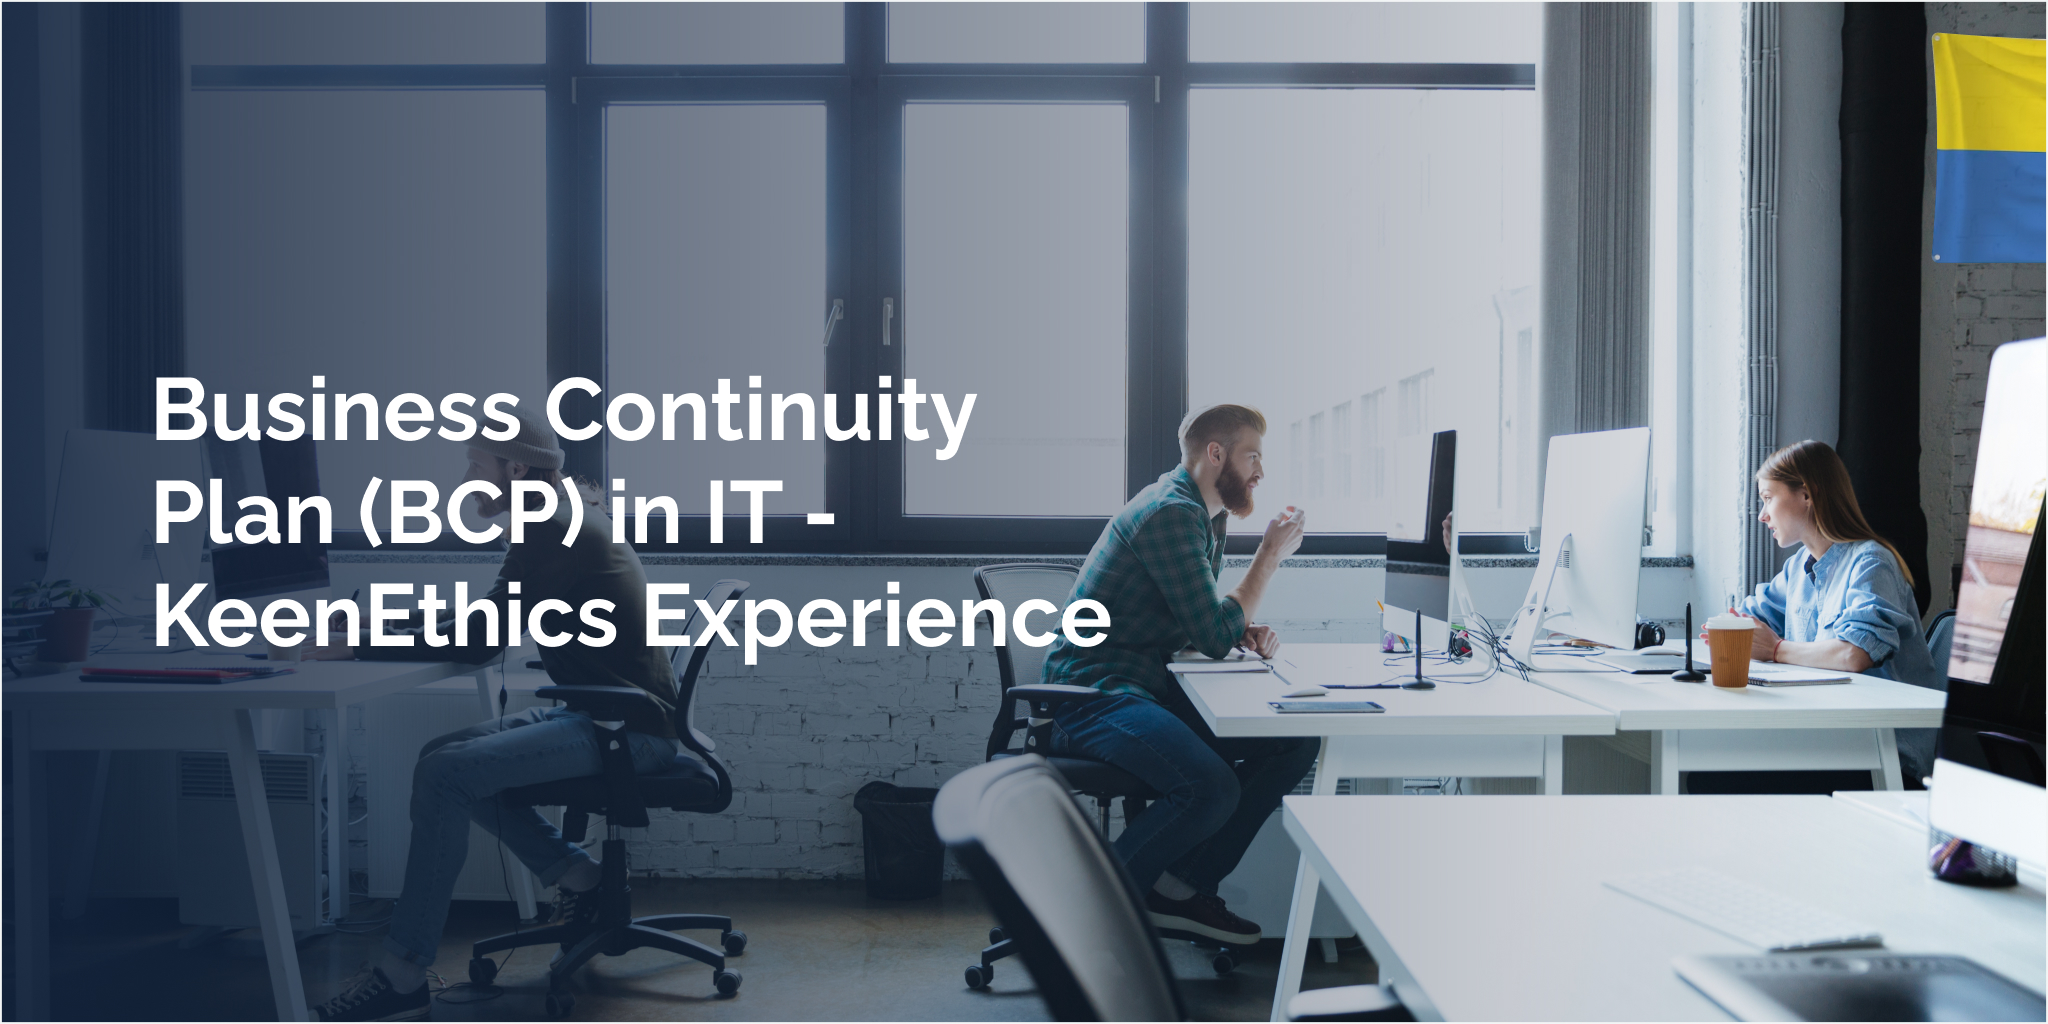 Business Continuity Plan (BCP) in IT - KeenEthics Experience